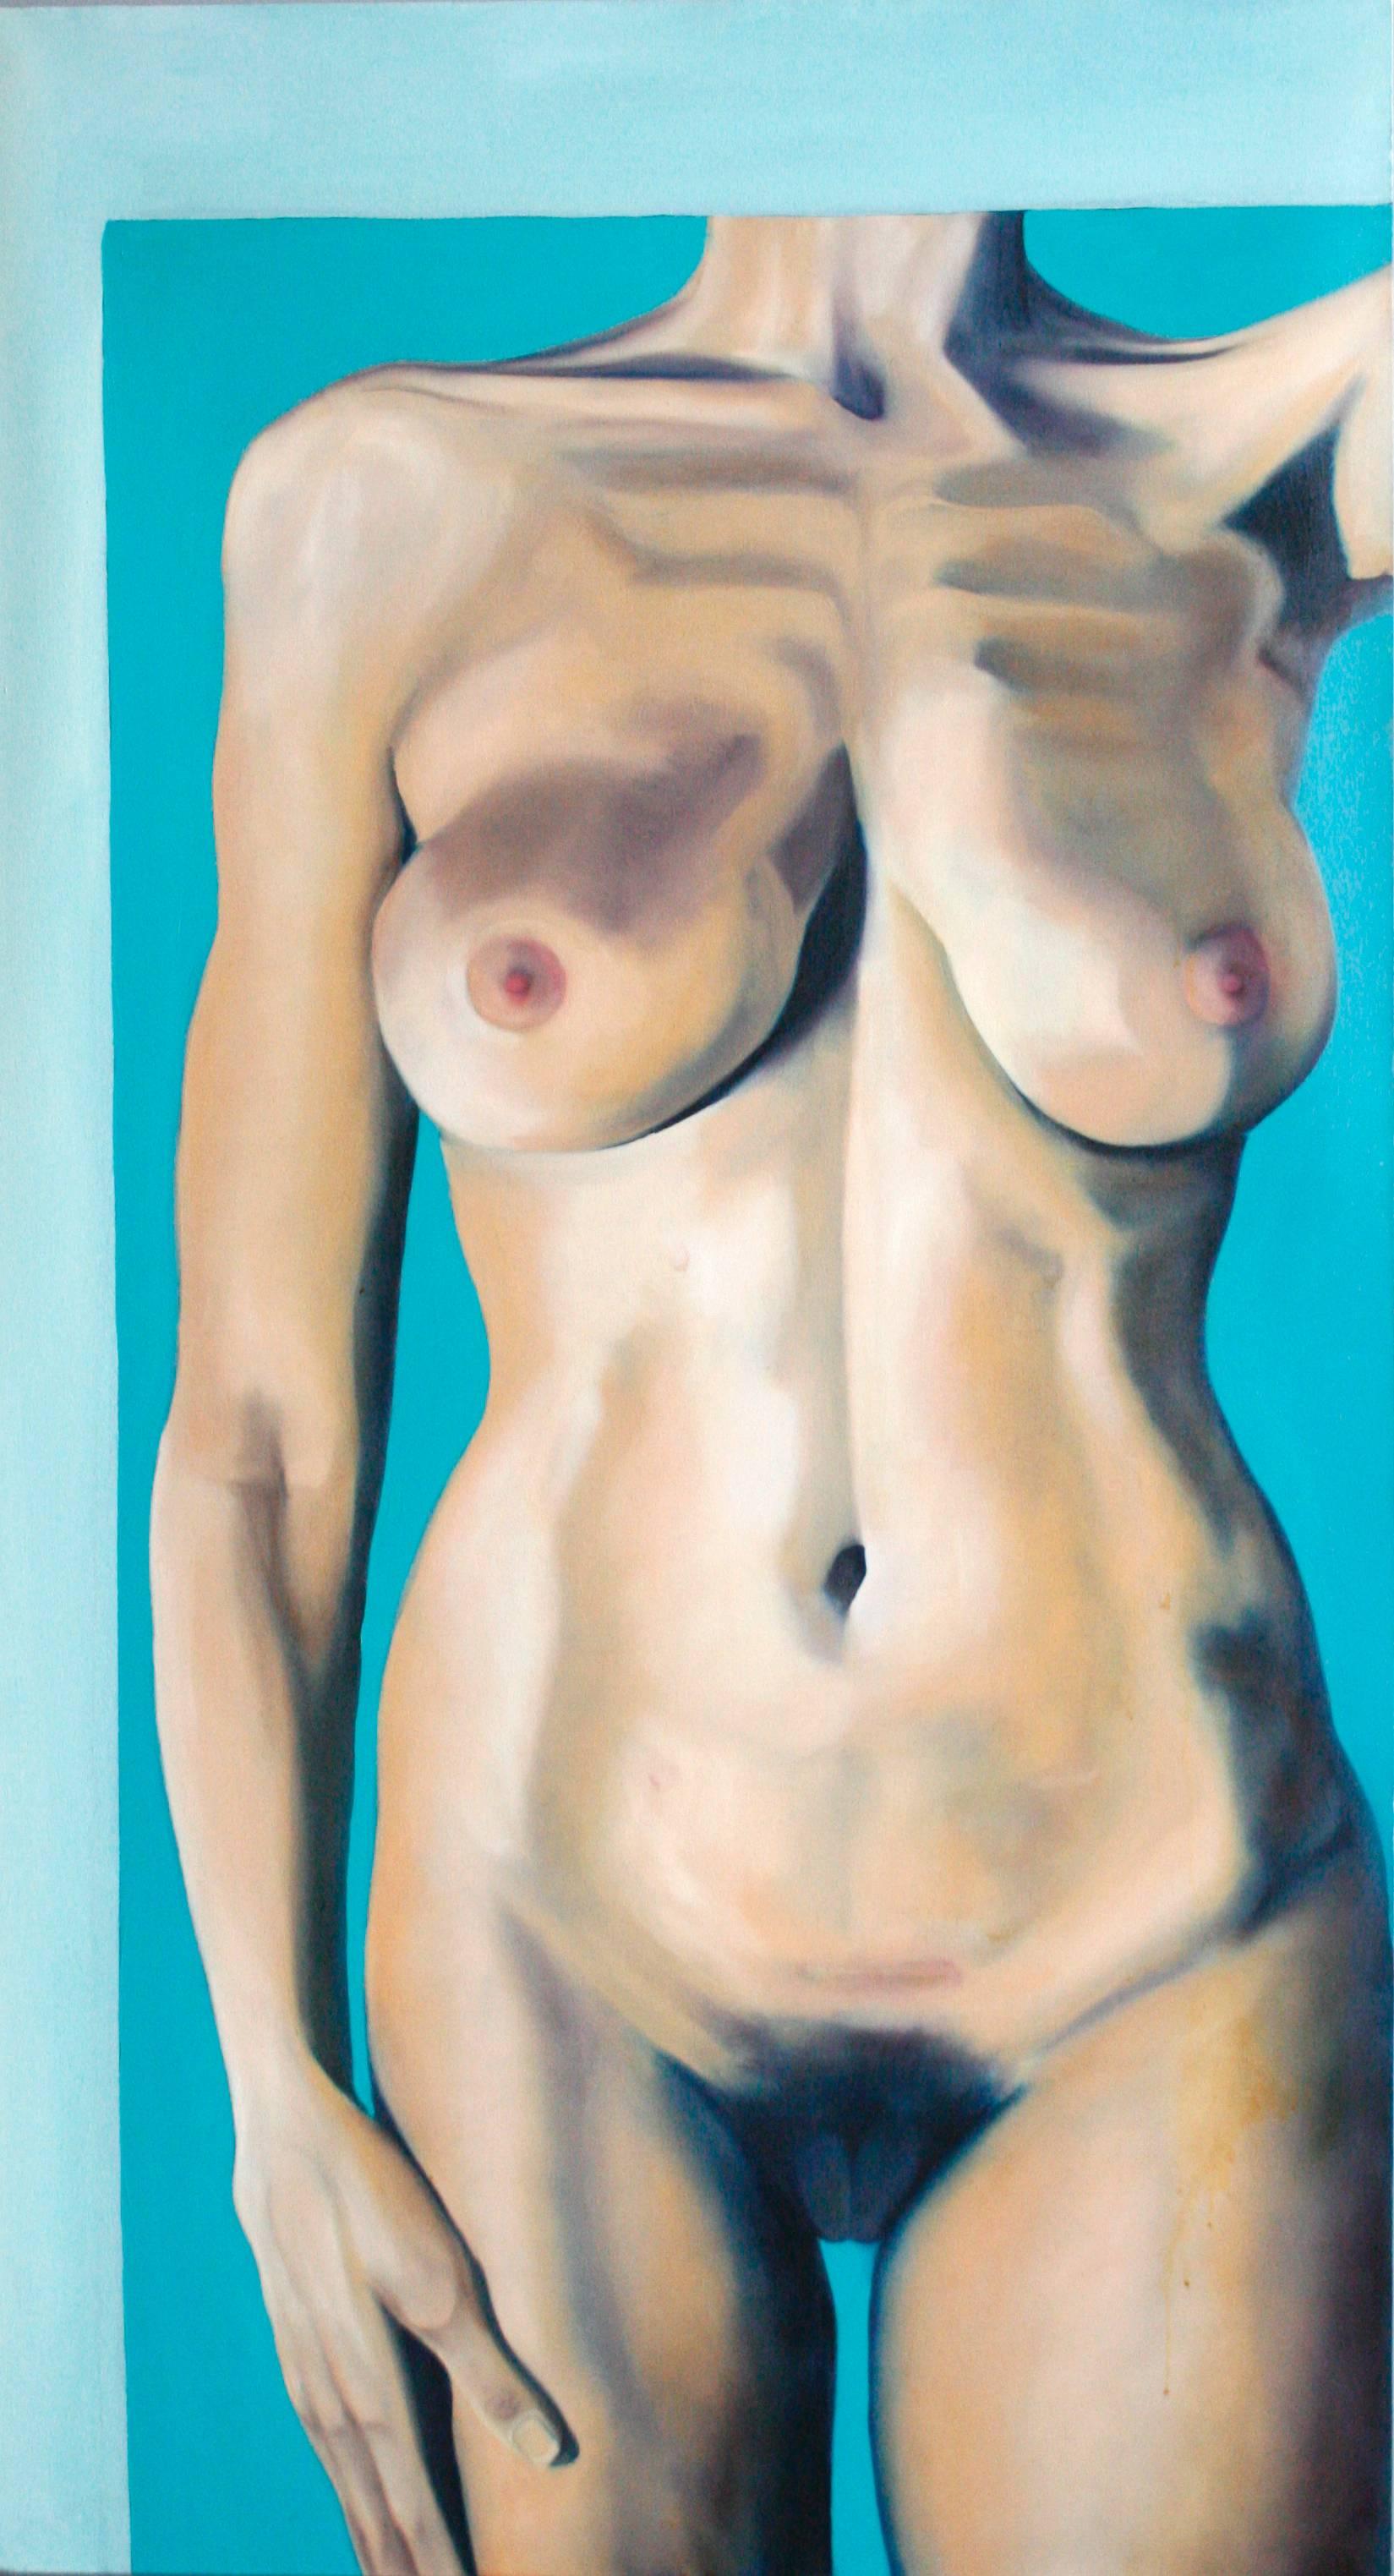 Lauren Rinaldi Nude Painting - "Self with Scars" Oil painting